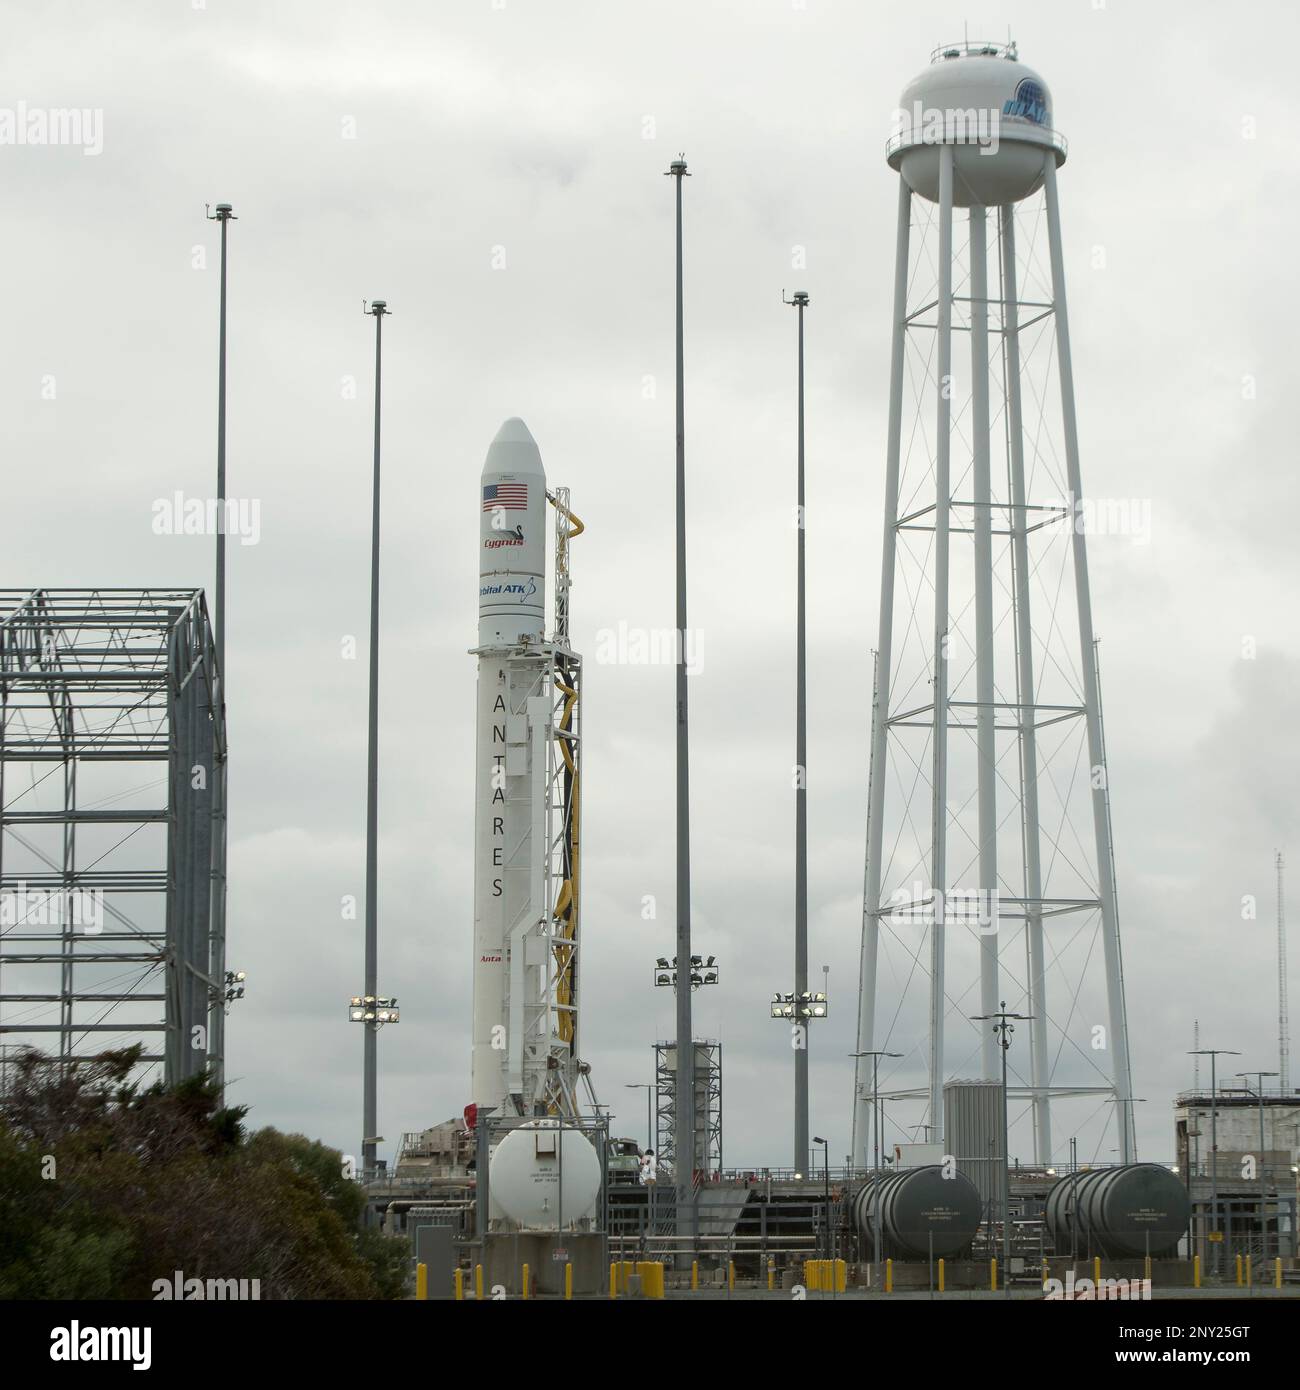 This photo provided by NASA shows the Orbital ATK Antares rocket, with the Cygnus spacecraft onboard, on launch Pad-0A, Thursday, Nov. 9, 2017 at NASA's Wallops Flight Facility in Wallops Island, Va. The Orbital ATK's eighth contracted cargo resupply mission will deliver over 7,400 pounds of science and research, crew supplies and vehicle hardware to the orbital laboratory and its crew at the International Space Station. (NASA/Bill Ingalls/NASA via AP) Stock Photo